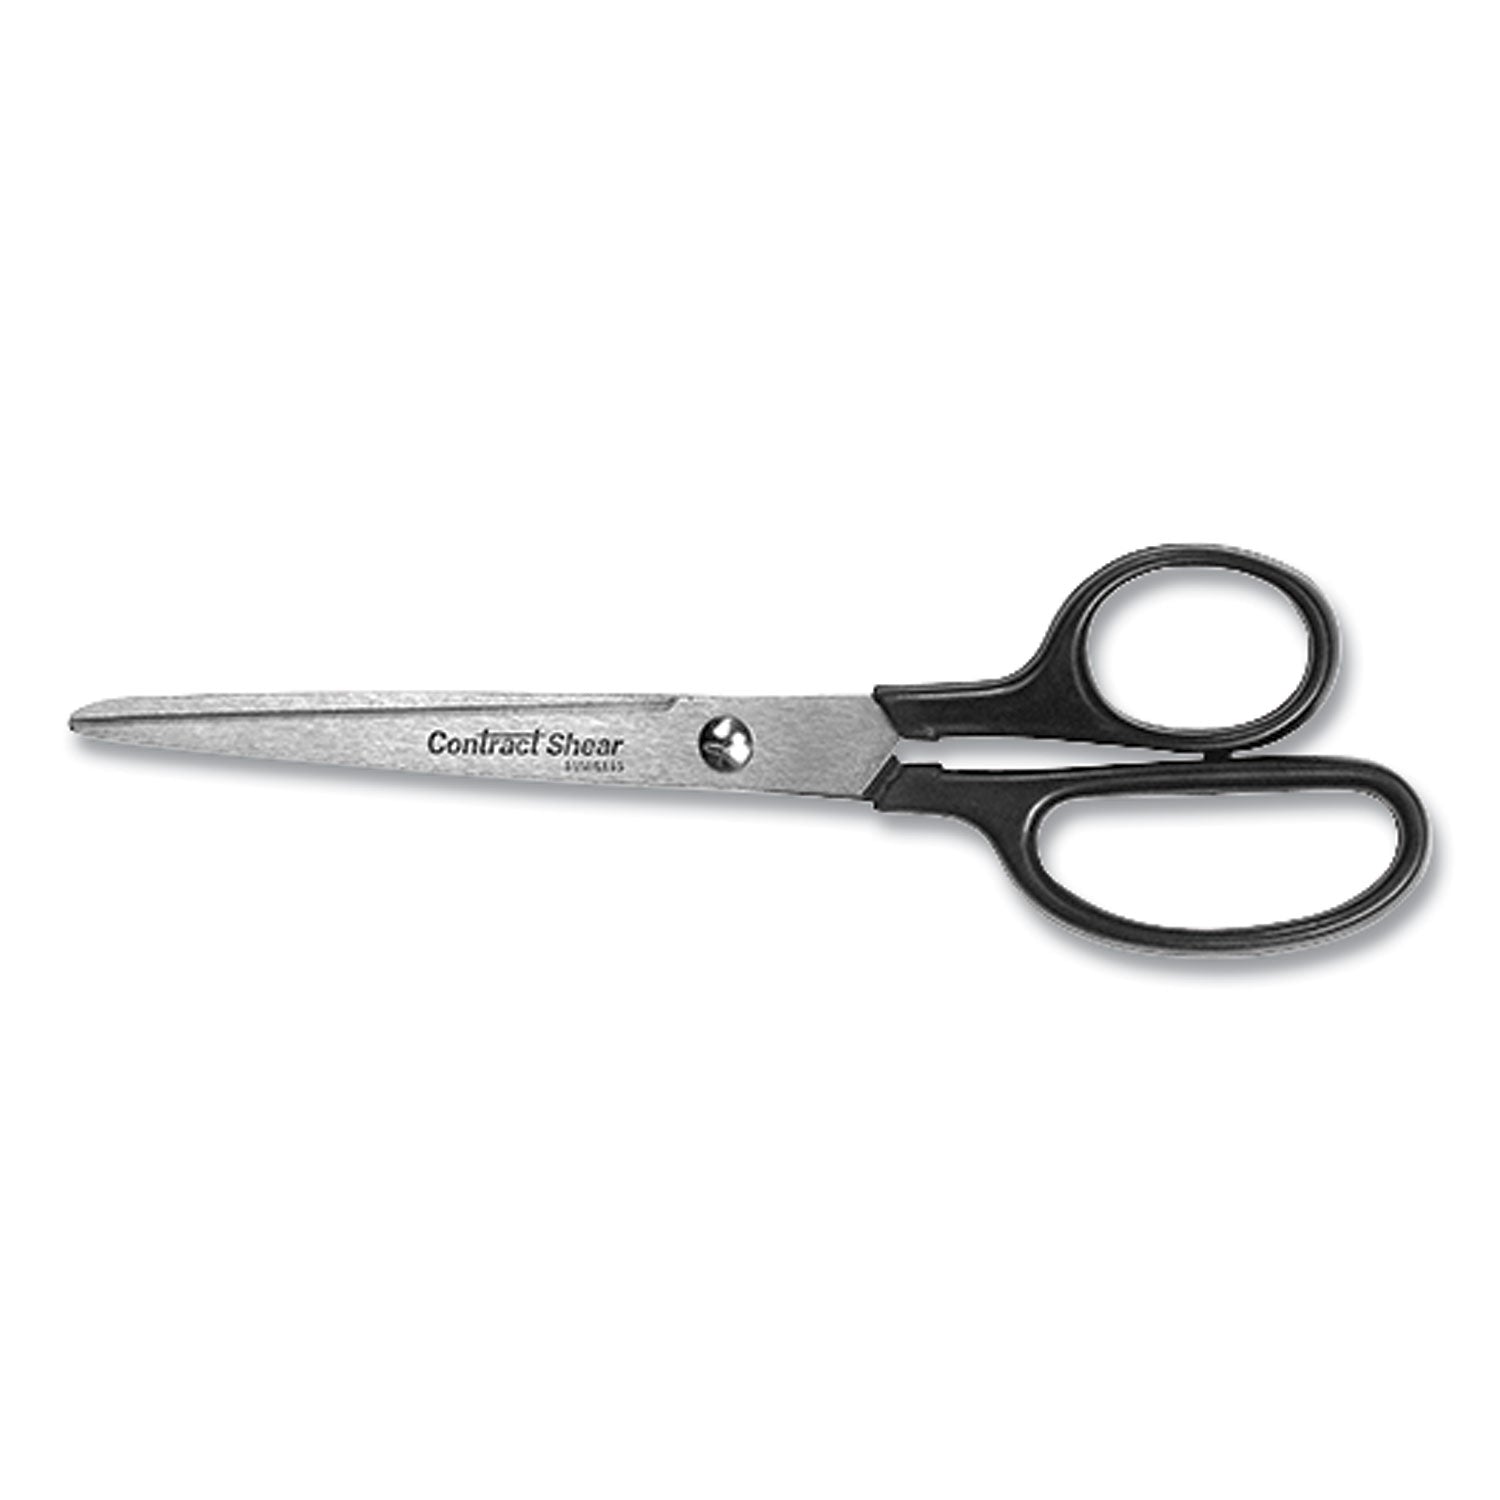 contract-stainless-steel-standard-scissors-7-long-313-cut-length-black-straight-handle_wtc10571 - 1